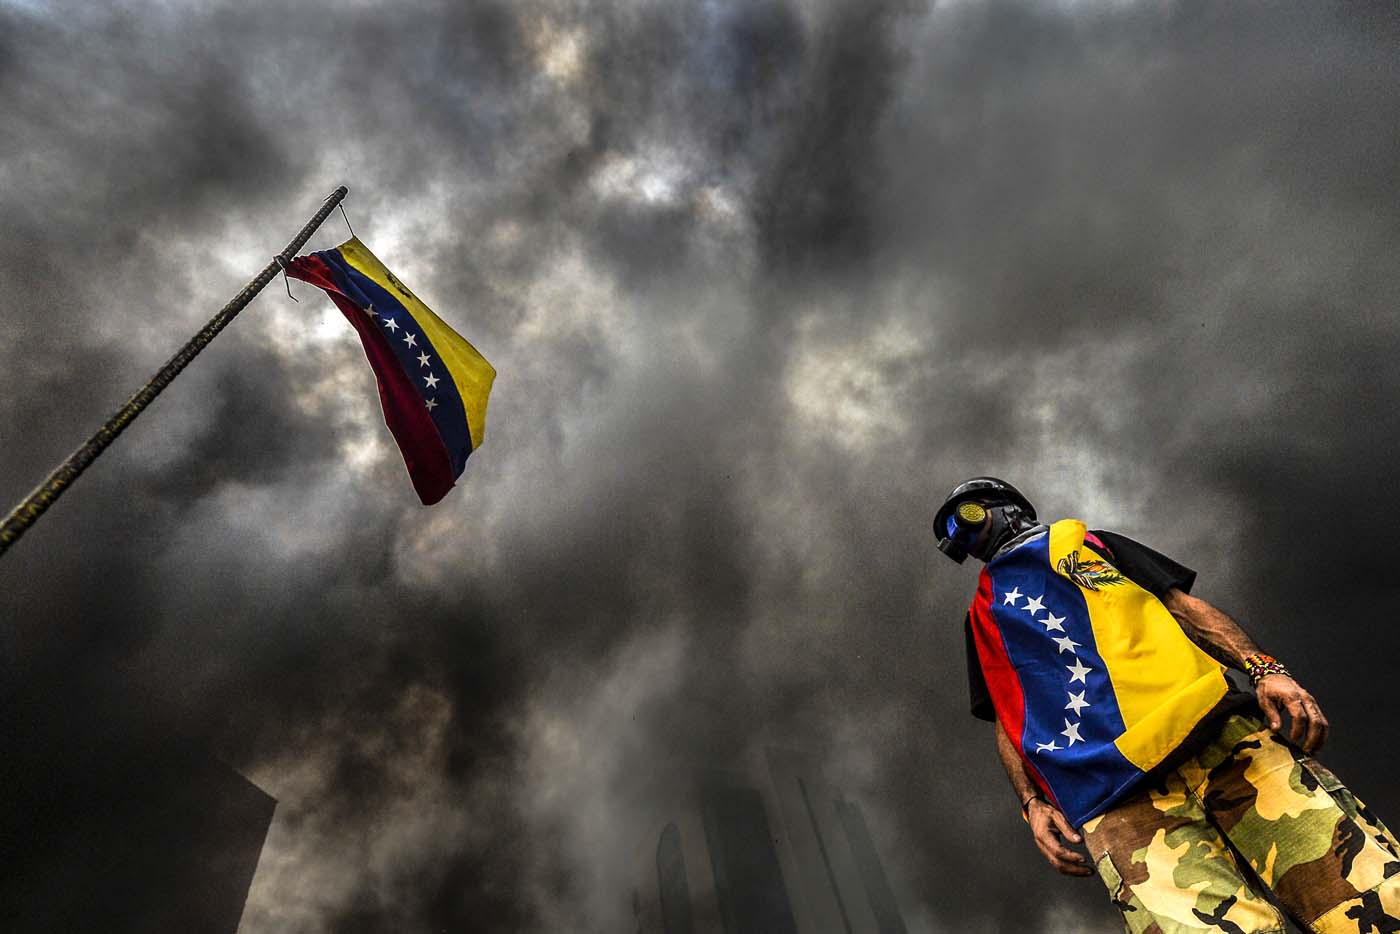 An anti-government demonstrator stands next to a national flag during an opposition protest blocking the Francisco Fajardo highway in Caracas on May 27, 2017. Demonstrations that got underway in late March have claimed the lives of 58 people, as opposition leaders seek to ramp up pressure on Venezuela's leftist president, whose already-low popularity has cratered amid ongoing shortages of food and medicines, among other economic woes. / AFP PHOTO / LUIS ROBAYO